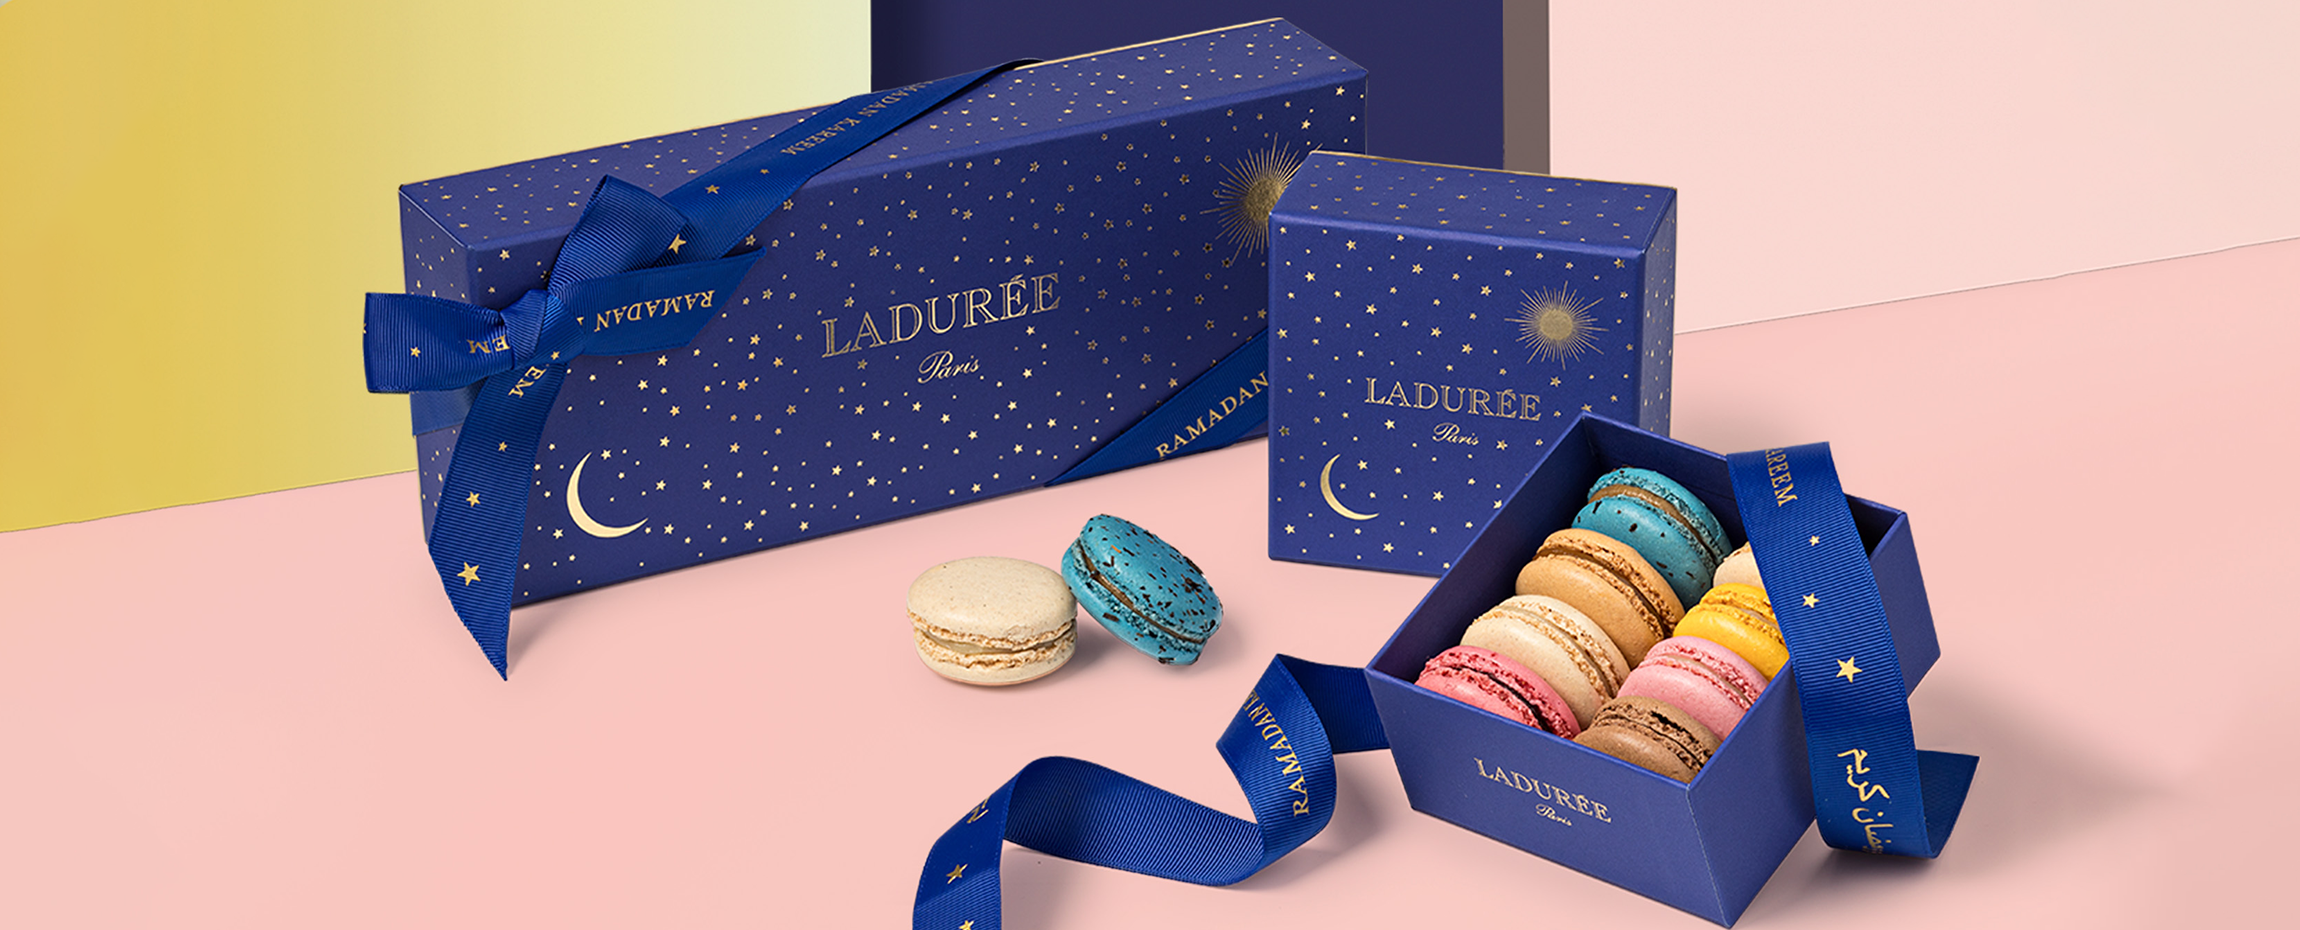 Treat (yourself) with Ladurée for this Ramadan